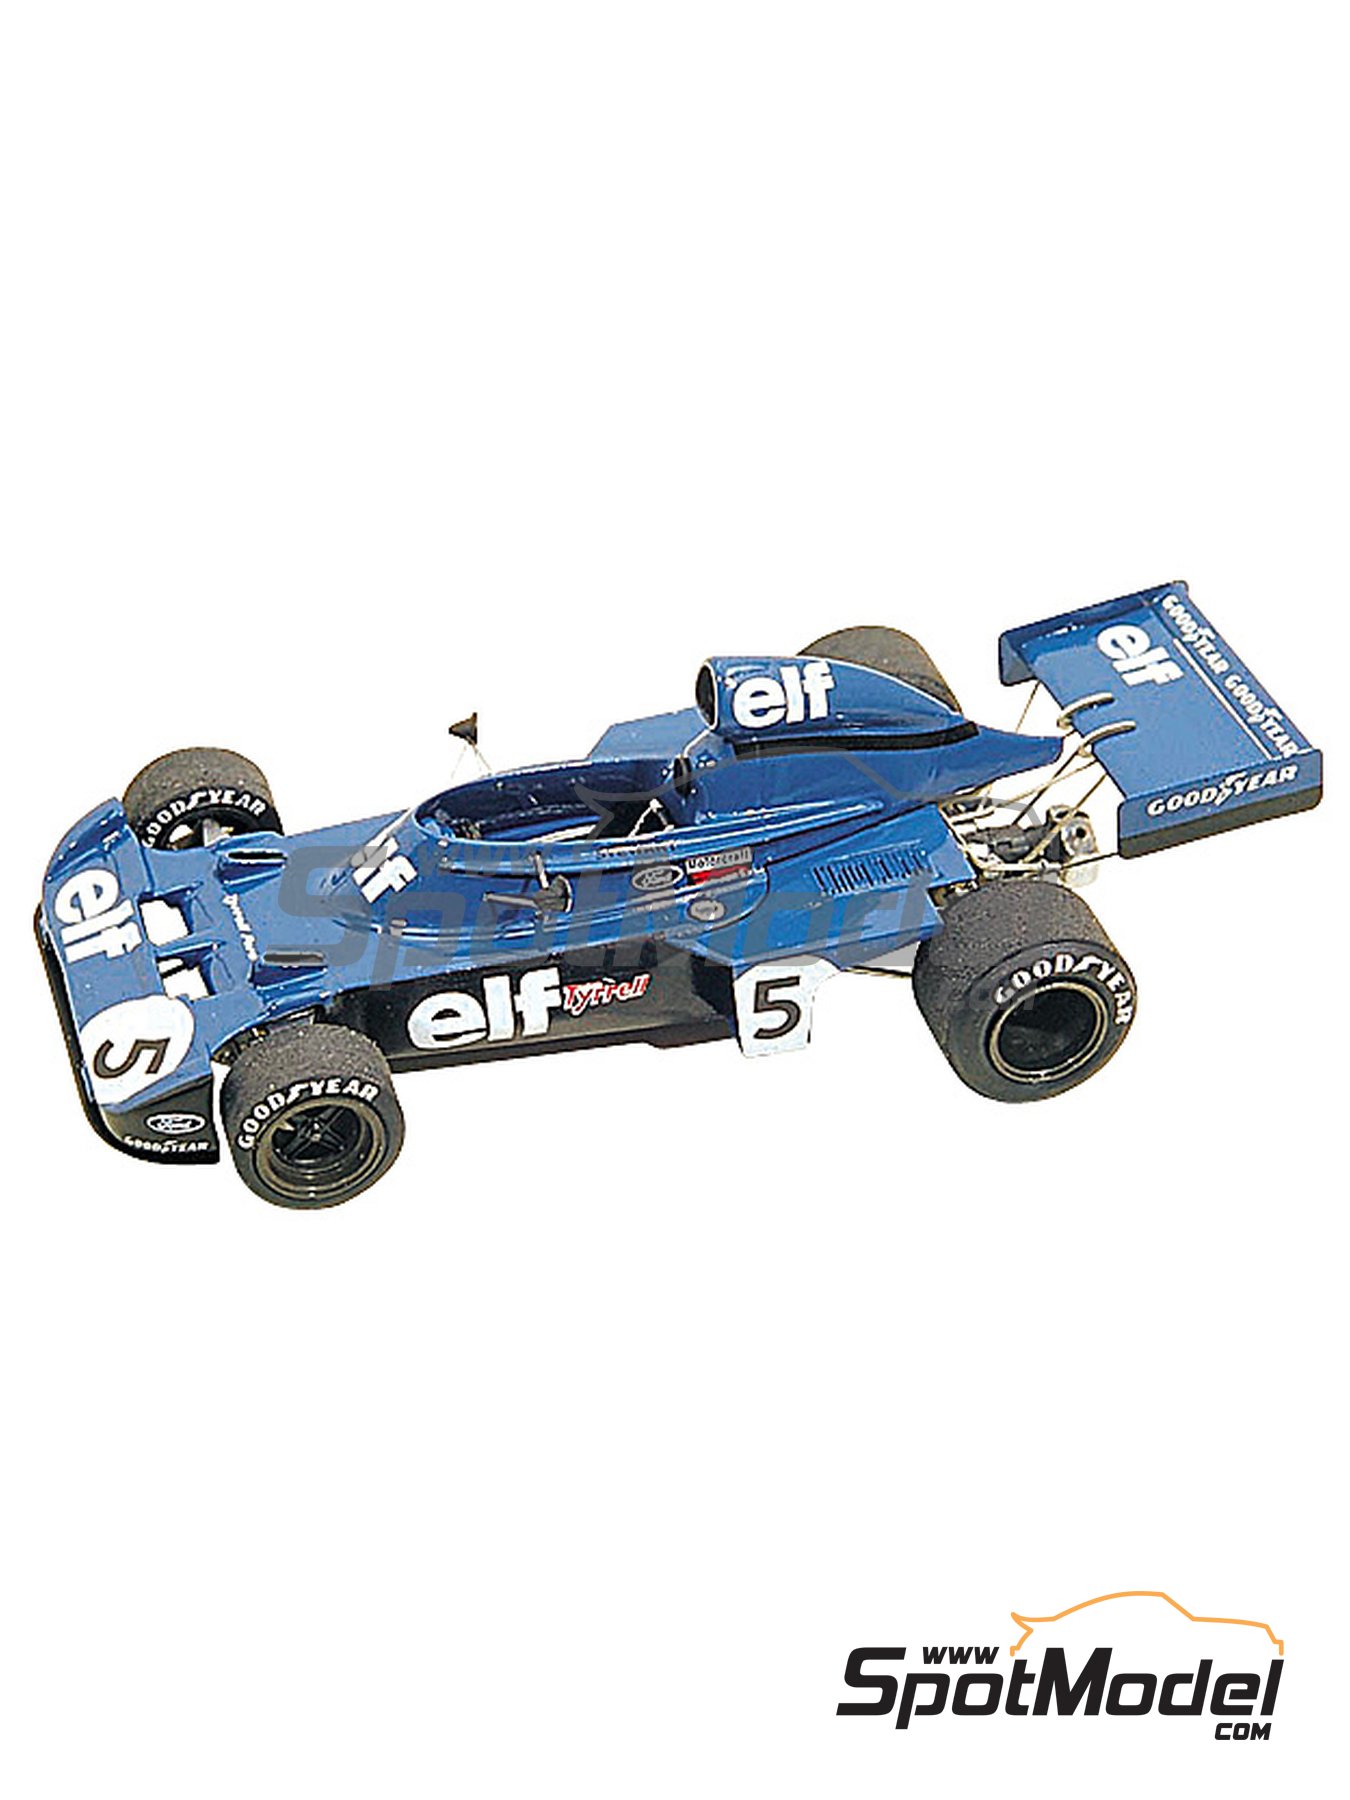 Tyrrell Ford 006 Tyrrell Racing Team sponsored by ELF - Monaco Formula 1  Grand Prix 1973. Car scale model kit in 1/43 scale manufactured by Tameo  Kits